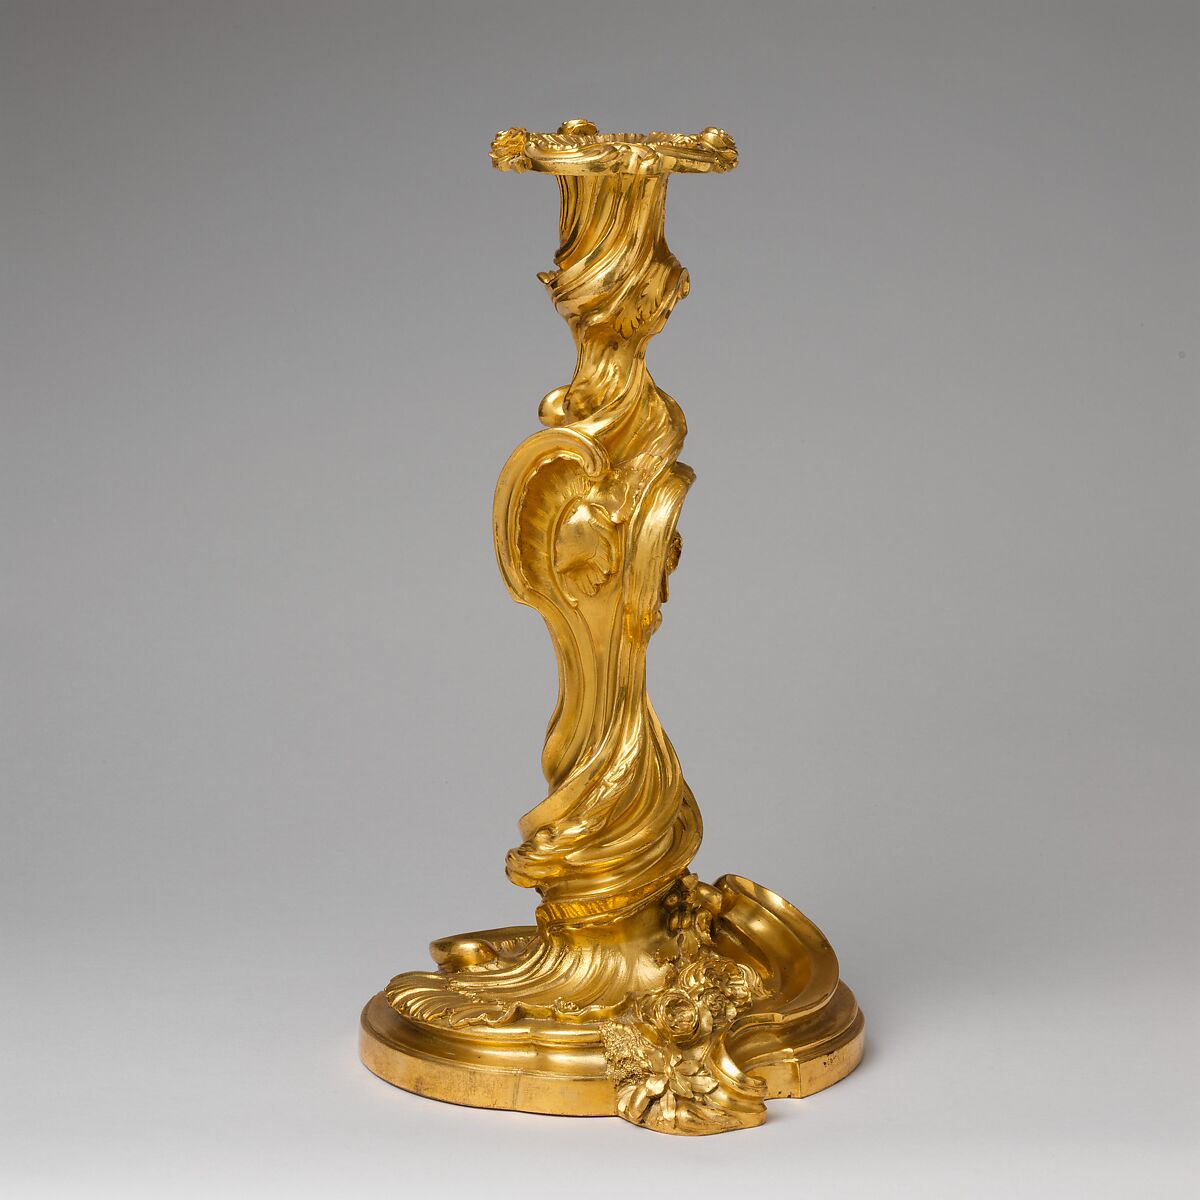 Pair of candlesticks (flambeaux or chandeliers), After designs by Juste Aurèle Meissonnier (French, Turin 1695–1750 Paris), Gilt bronze, French, Paris 